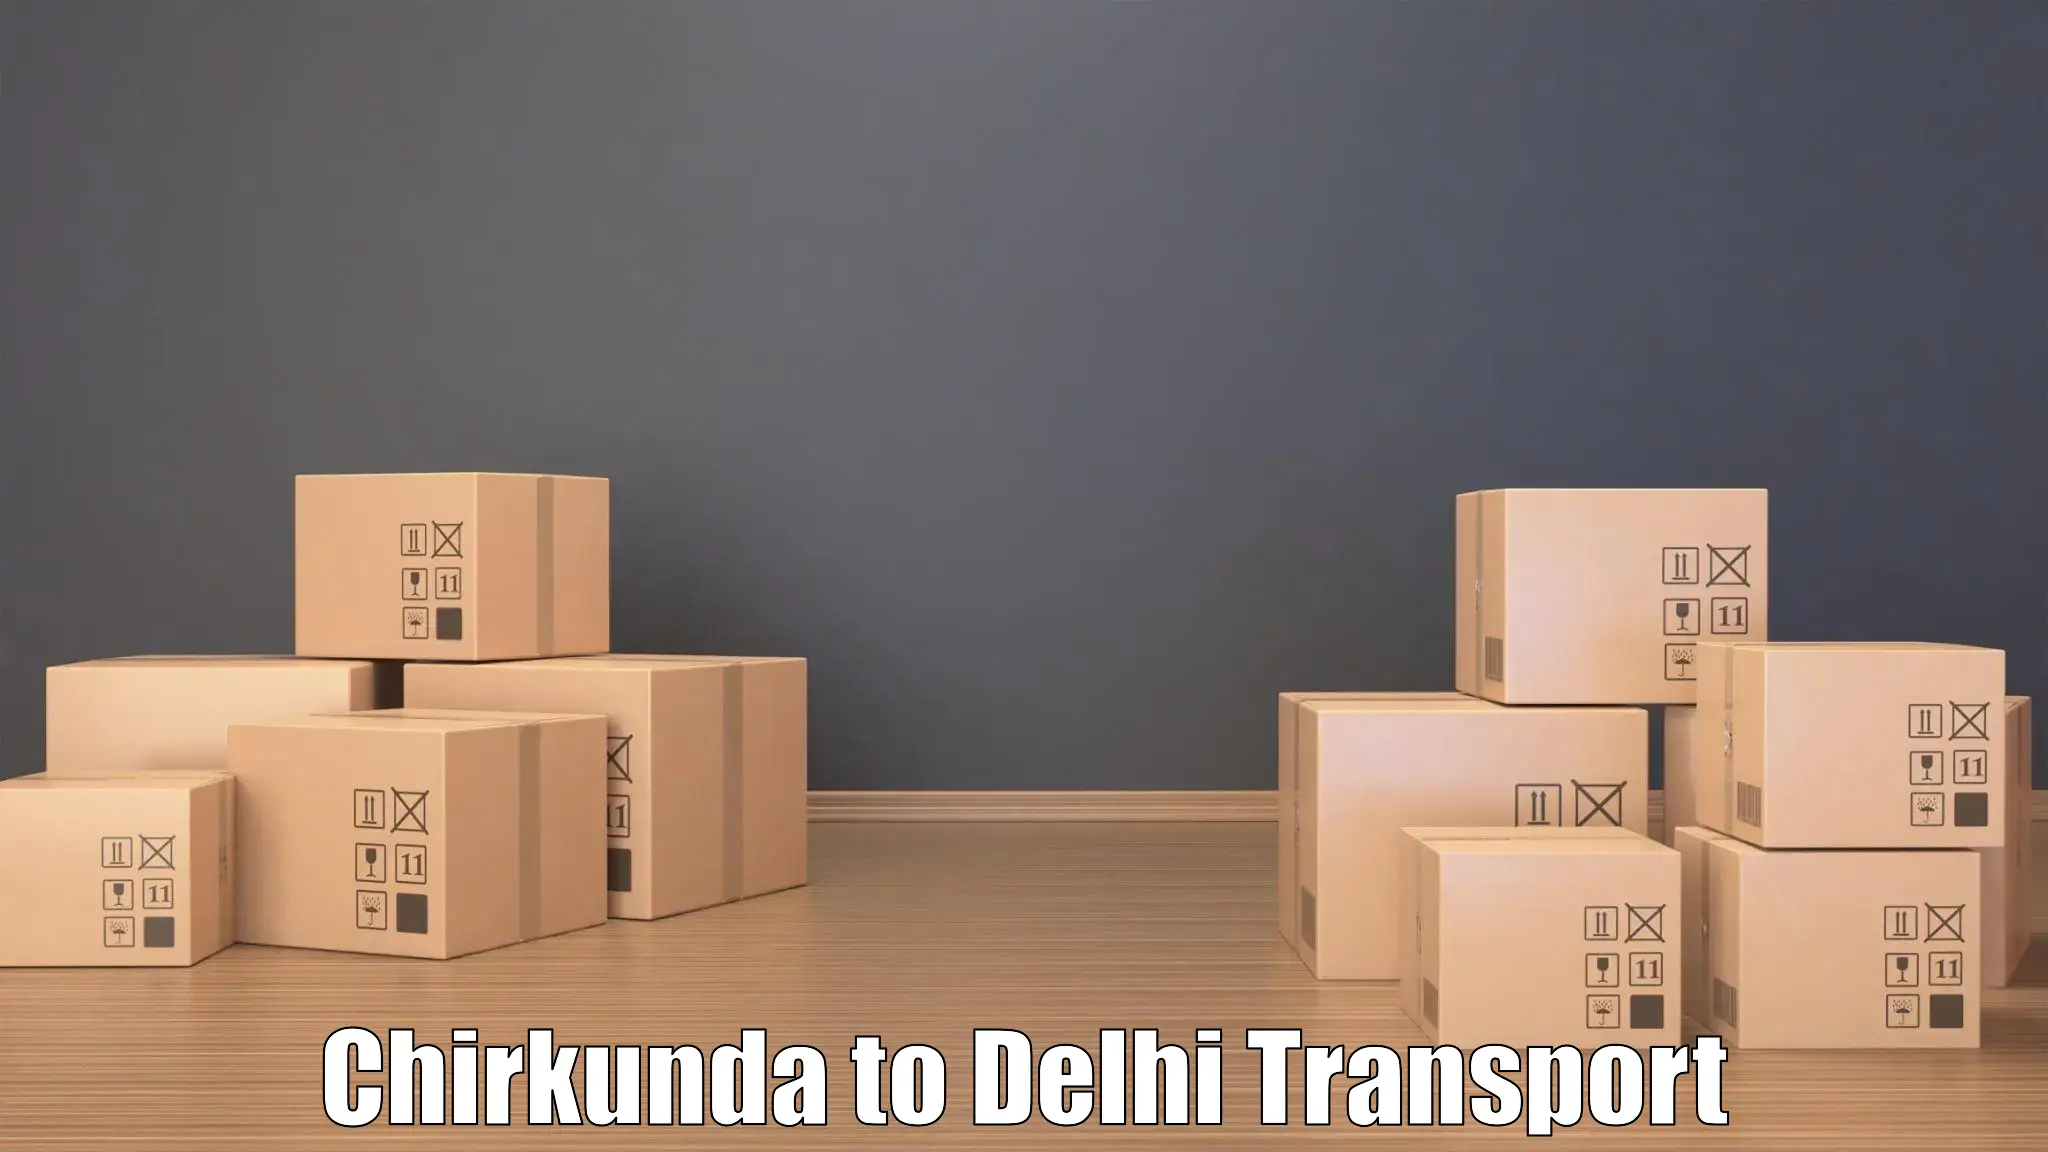 Best transport services in India Chirkunda to Indraprastha